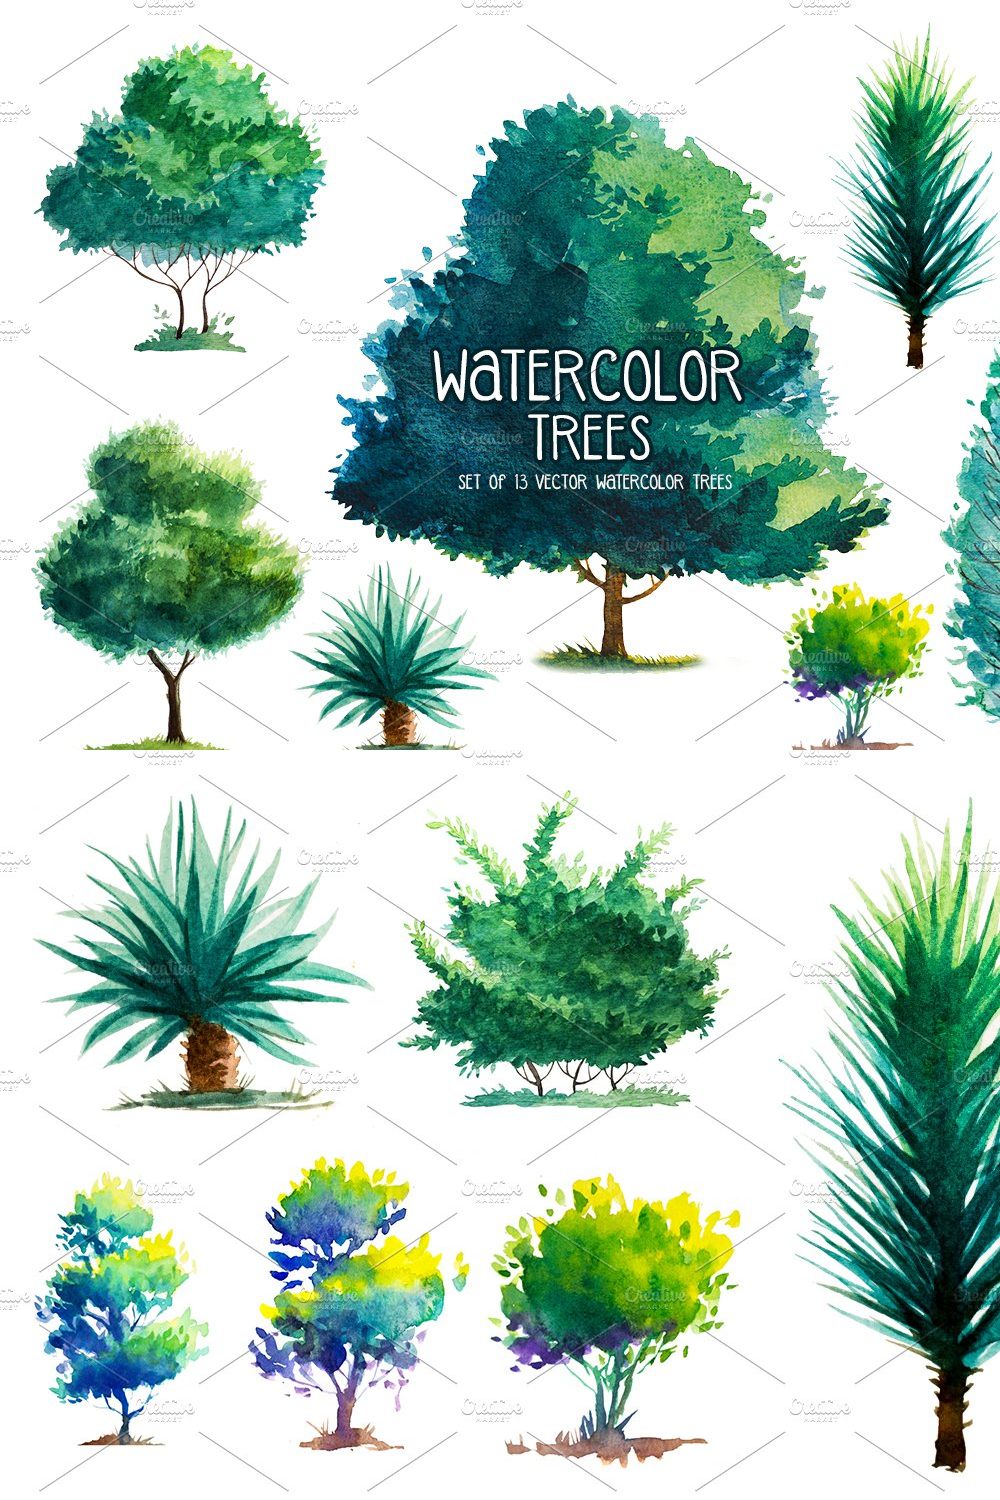 Watercolor Trees pinterest preview image.